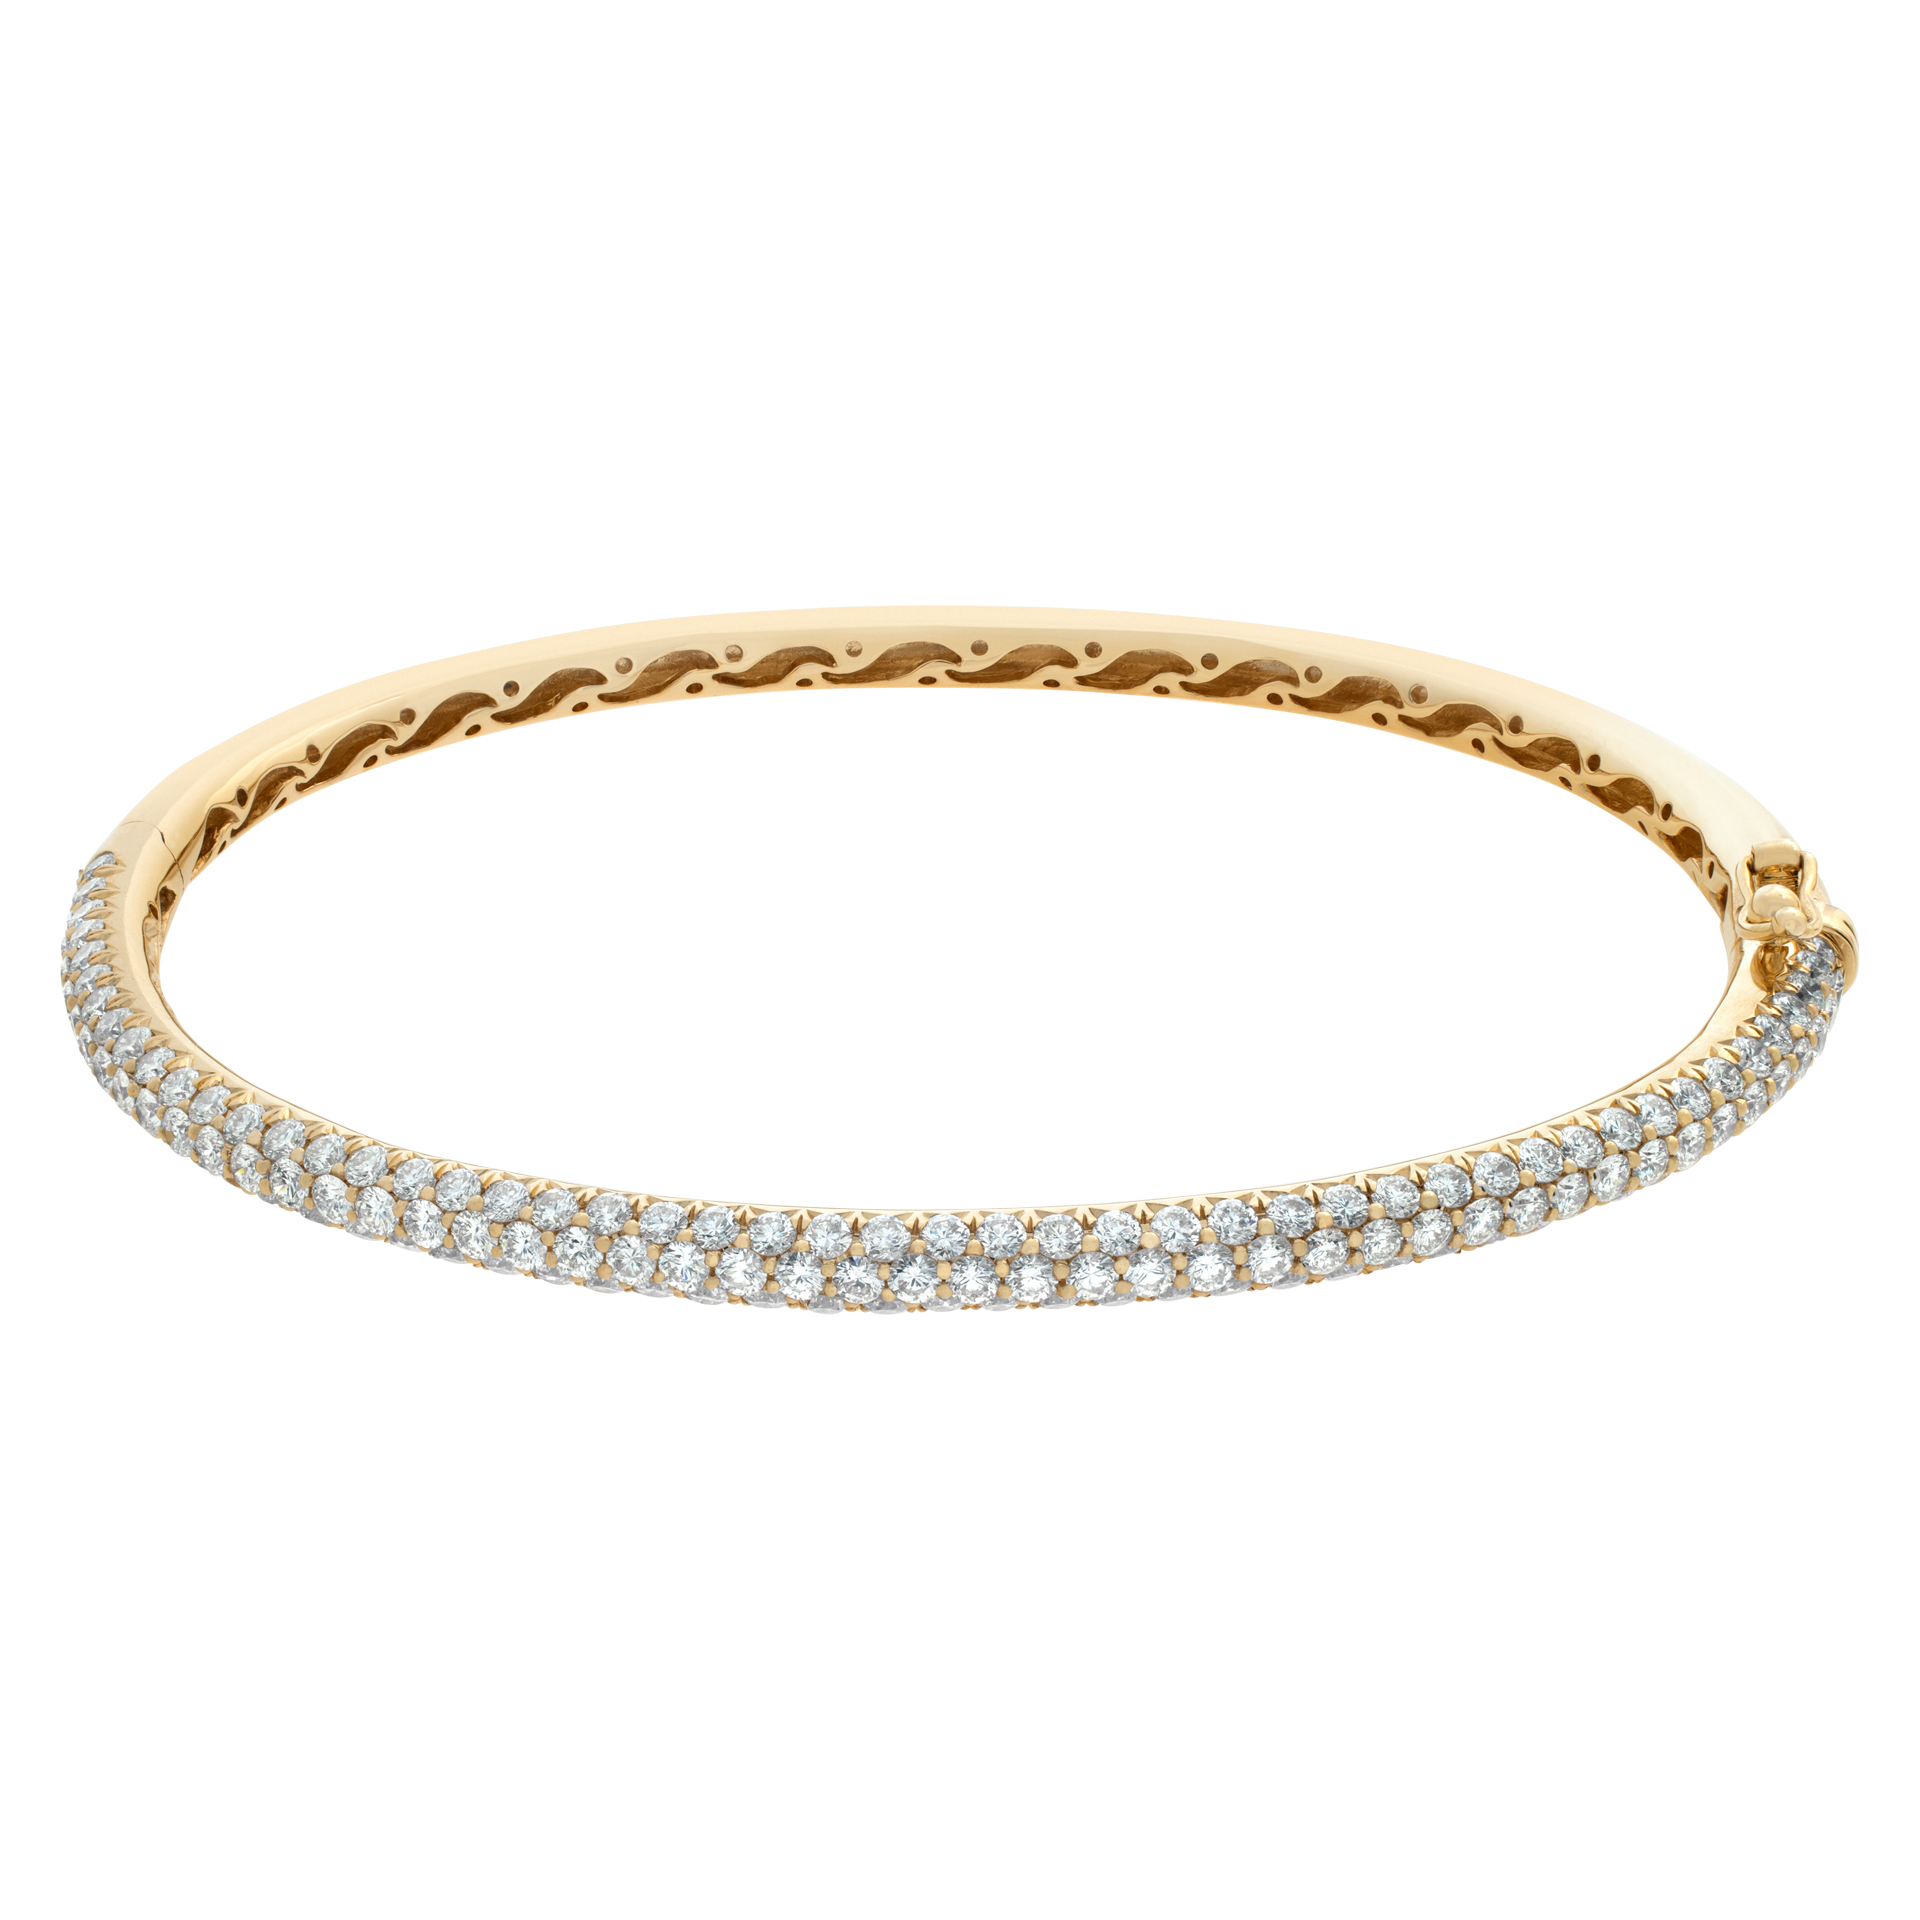 18k yellow gold bangle with 2.86 carats in brilliant round cut pave diamonds